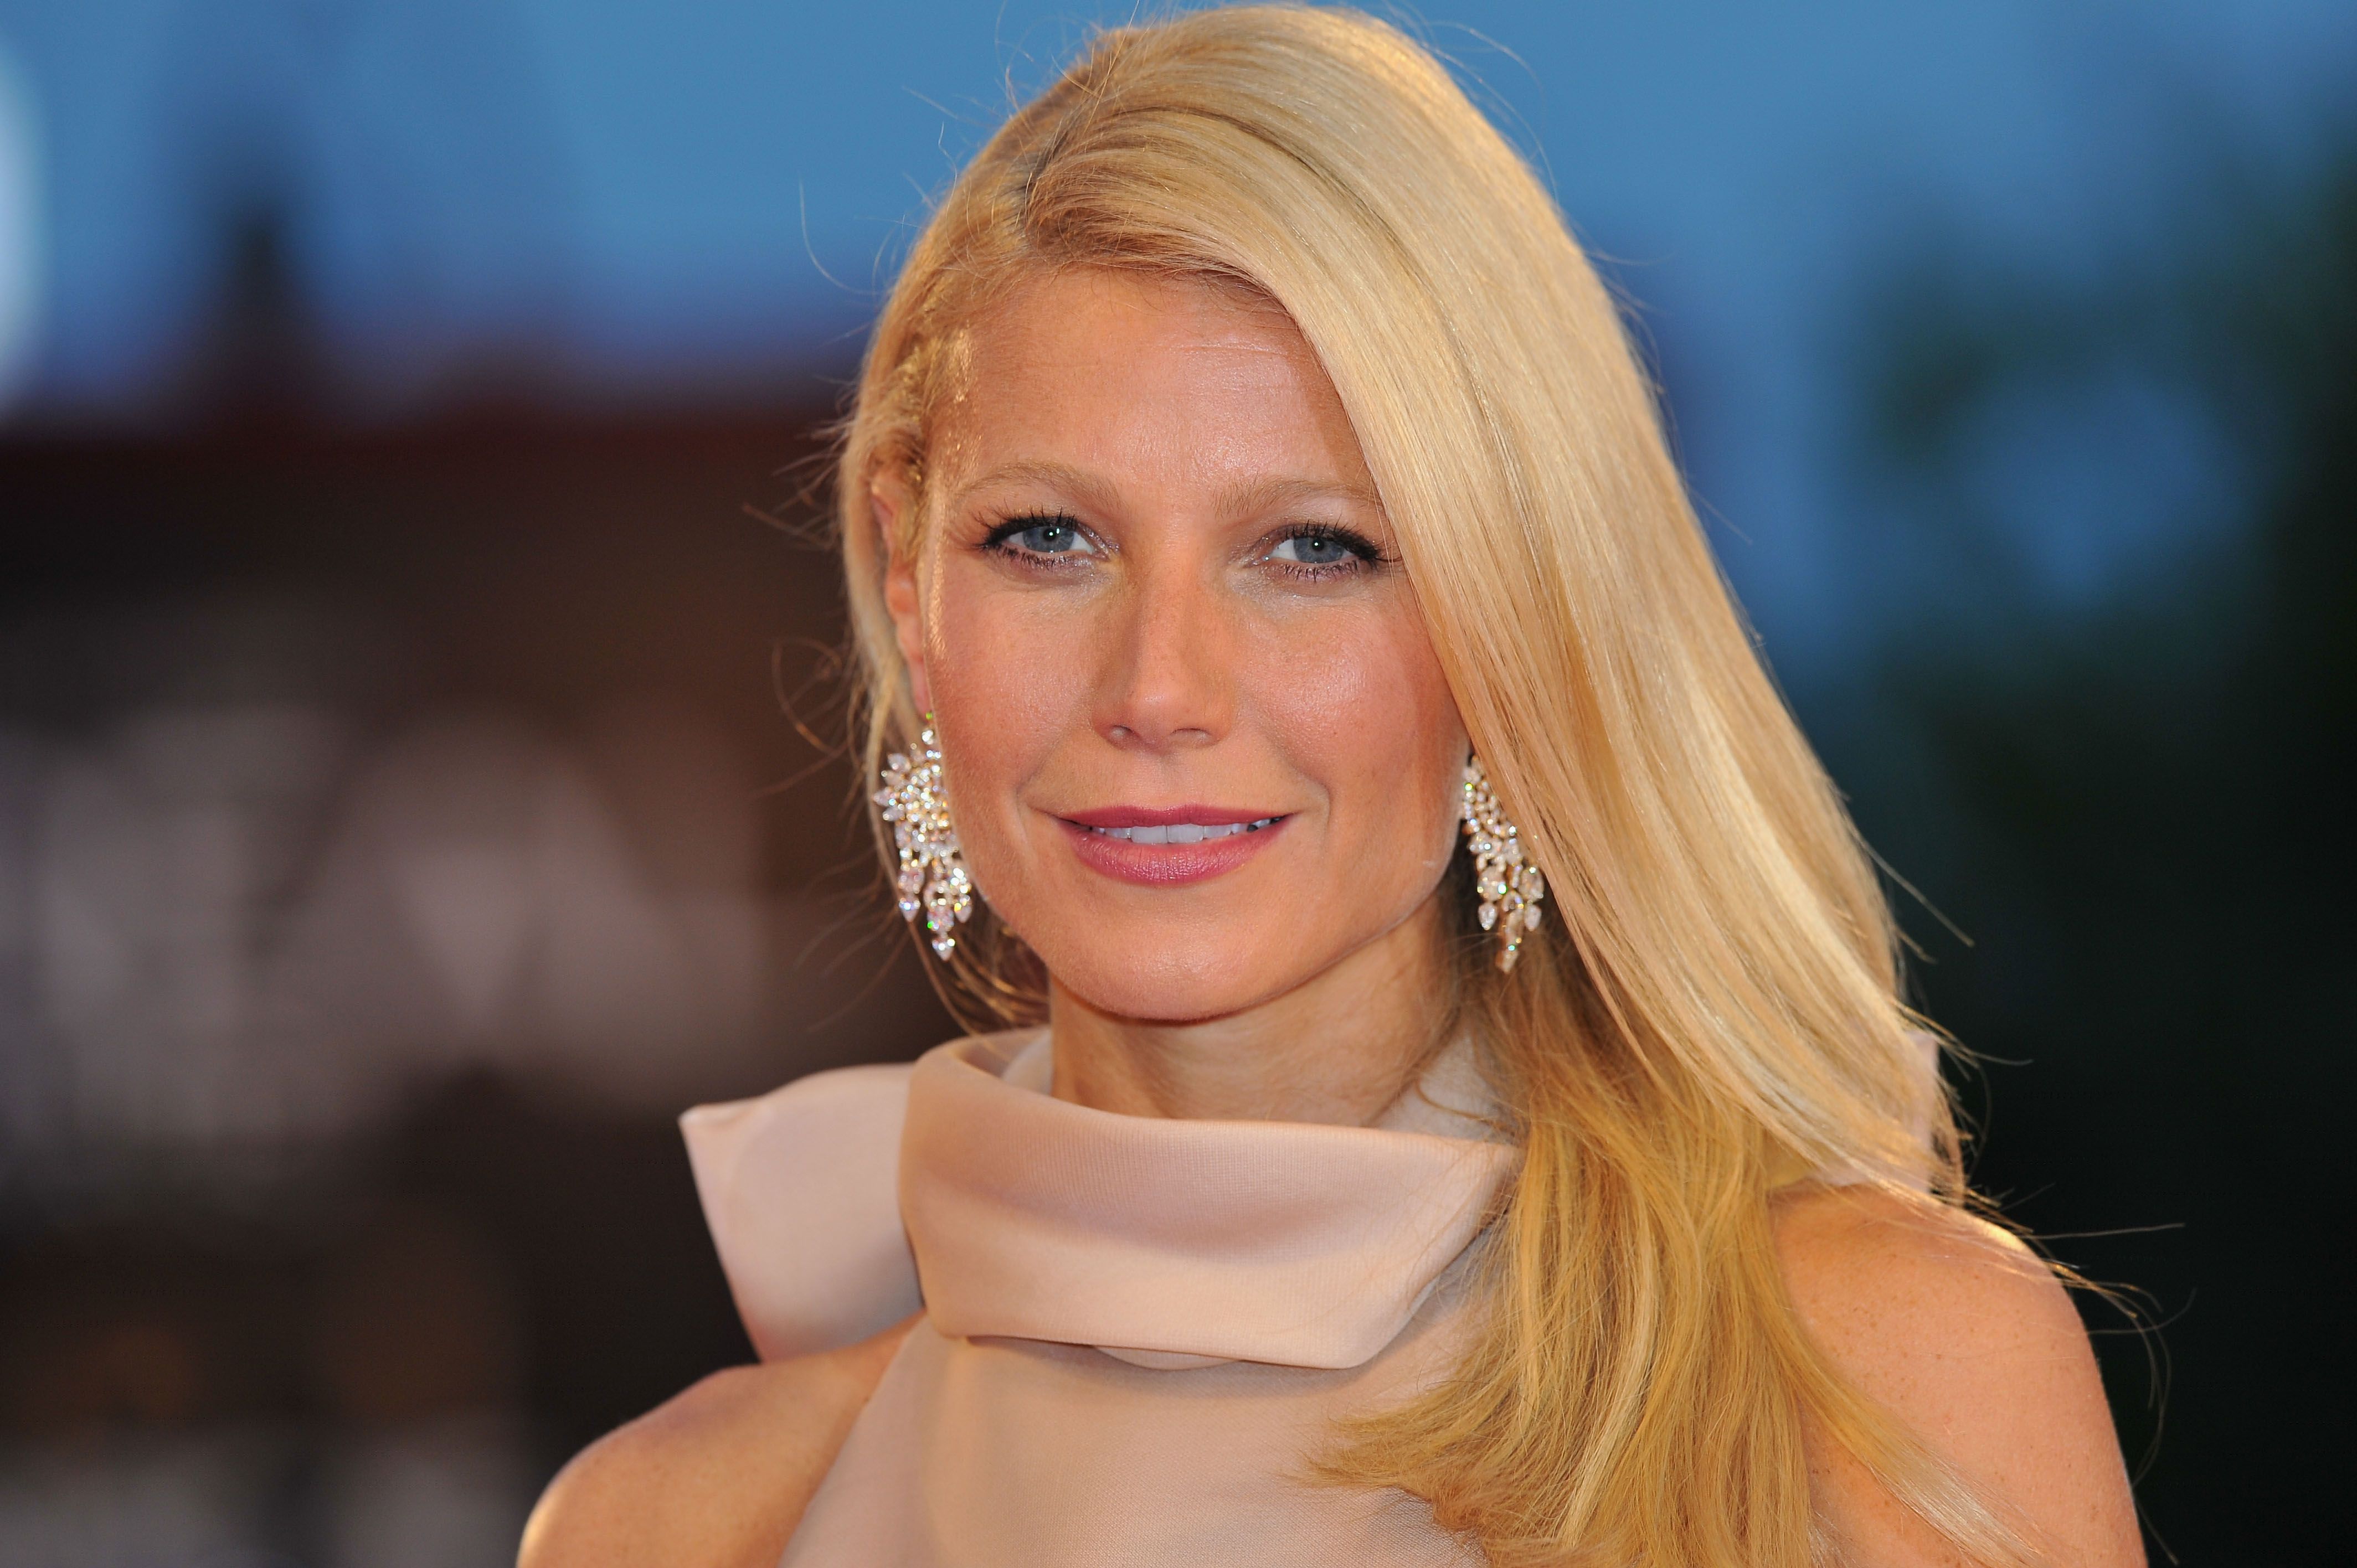 Gwyneth Paltrow Shares a Nude Photo to Mark Her 48th Birthday